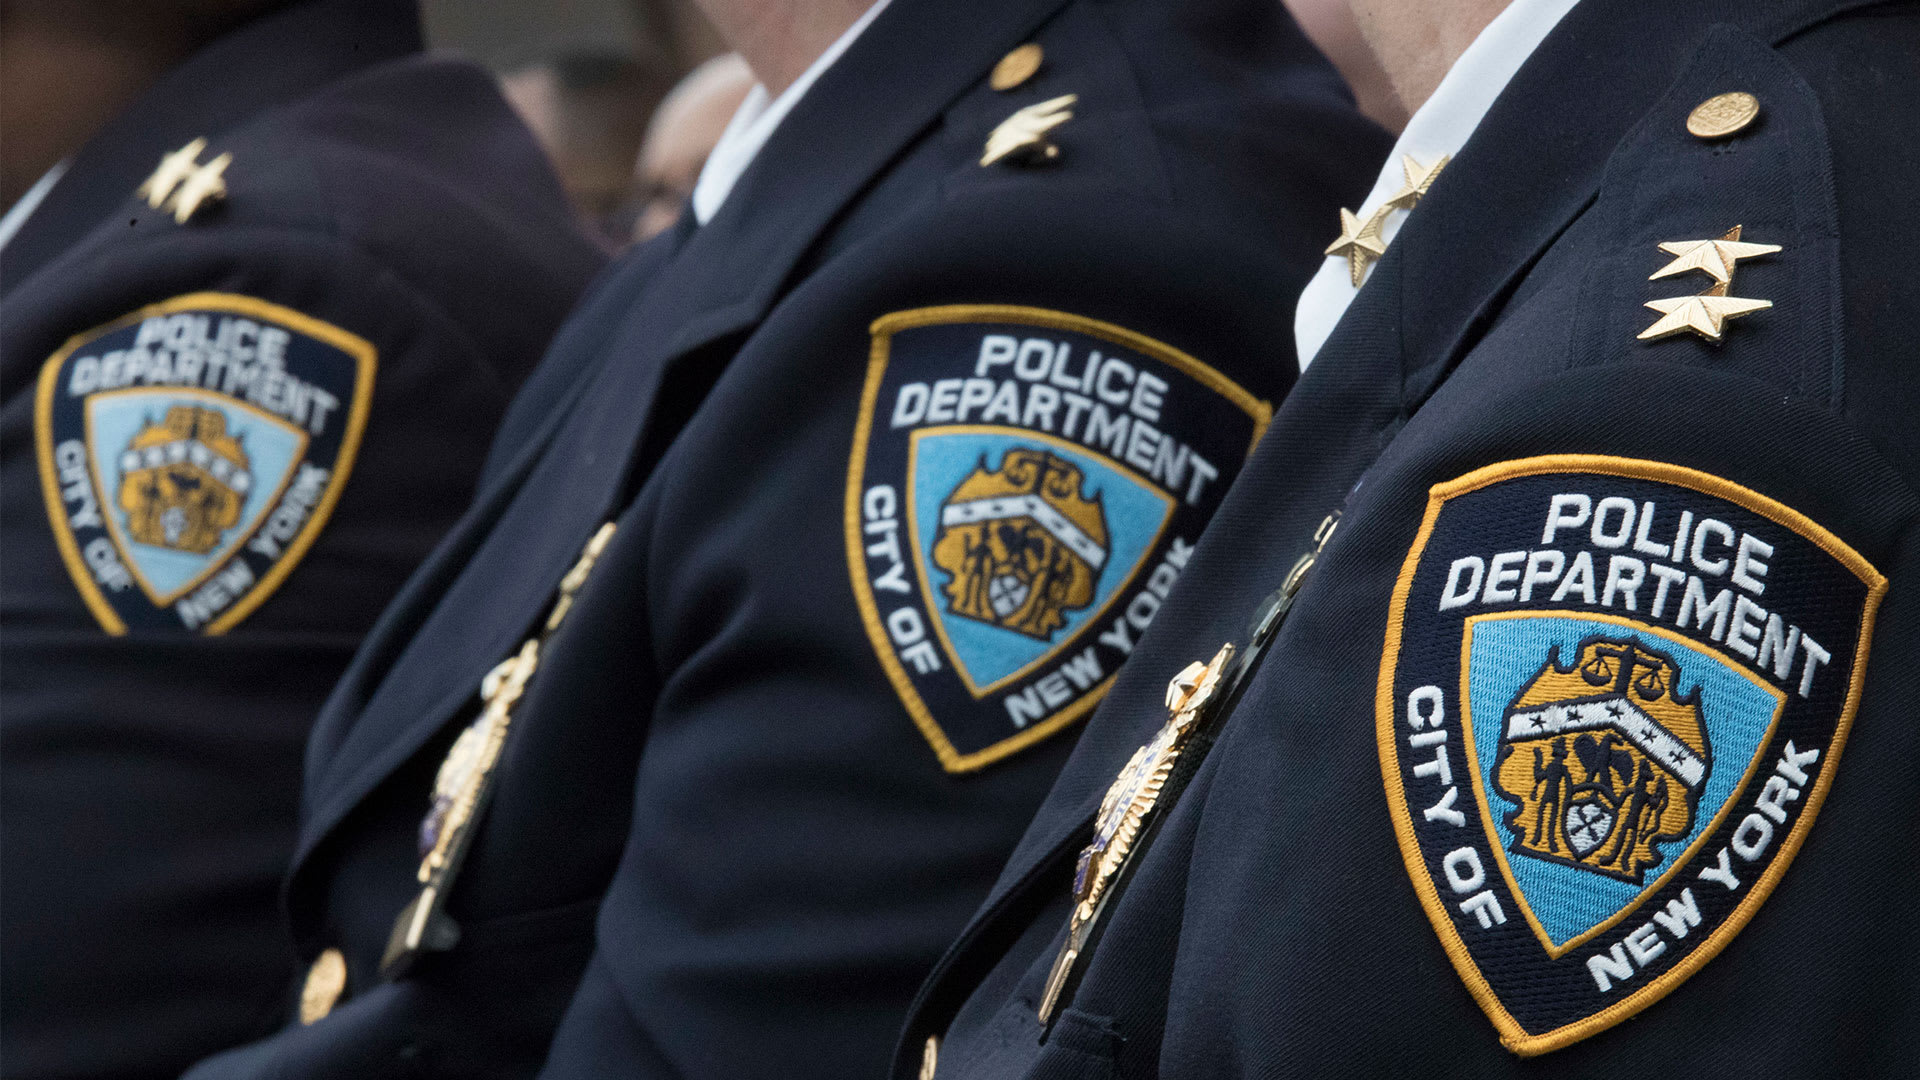 Allegations of Racist Social Media Post Prompt Investigation of New York Officer